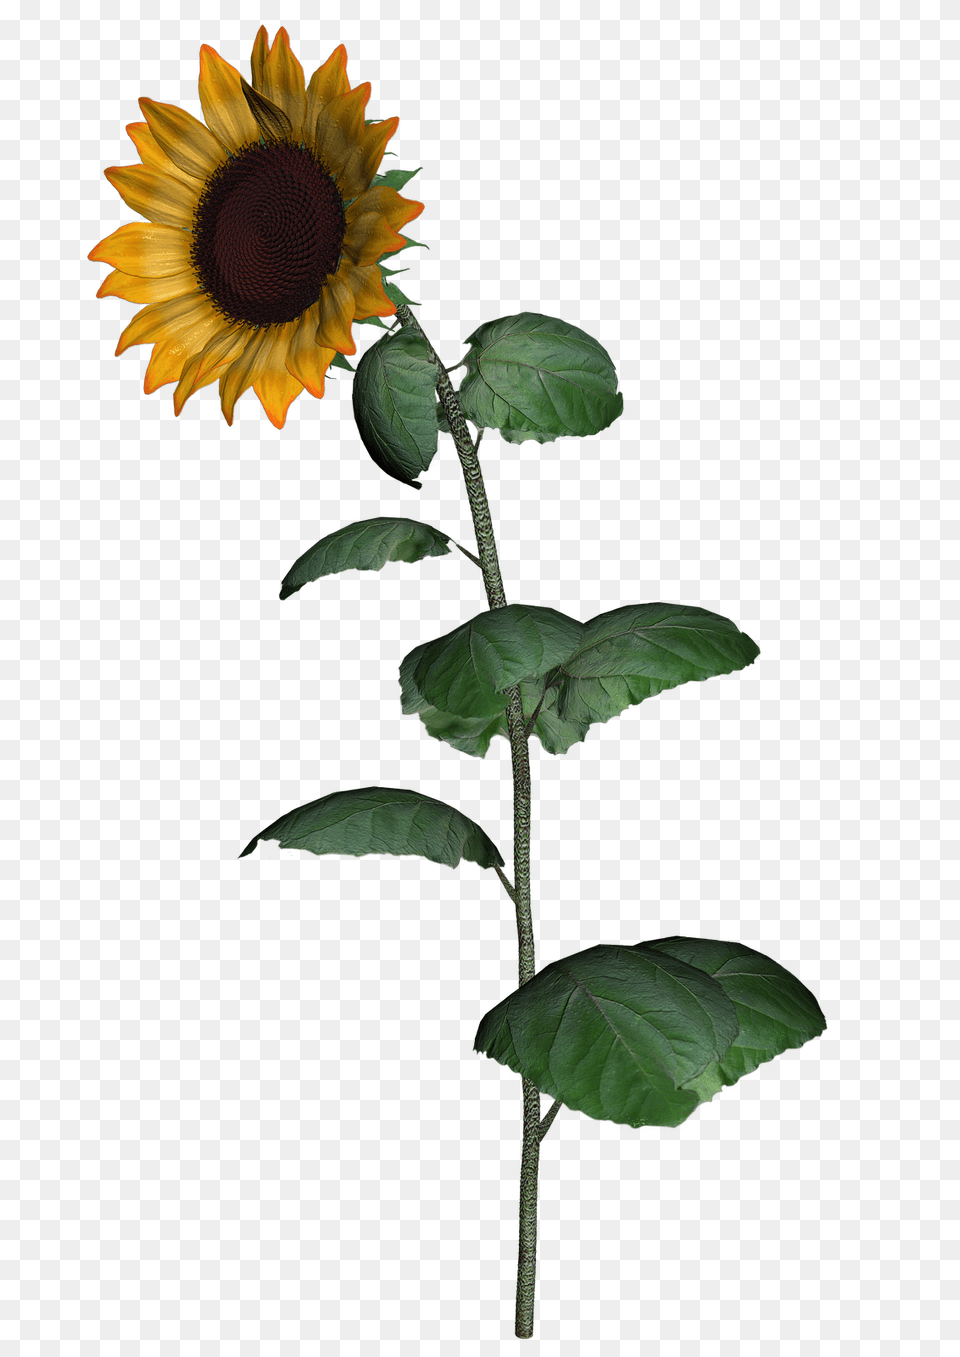 Sunflower Clipart With Leaf Images Sunflower Stem, Flower, Plant Free Transparent Png